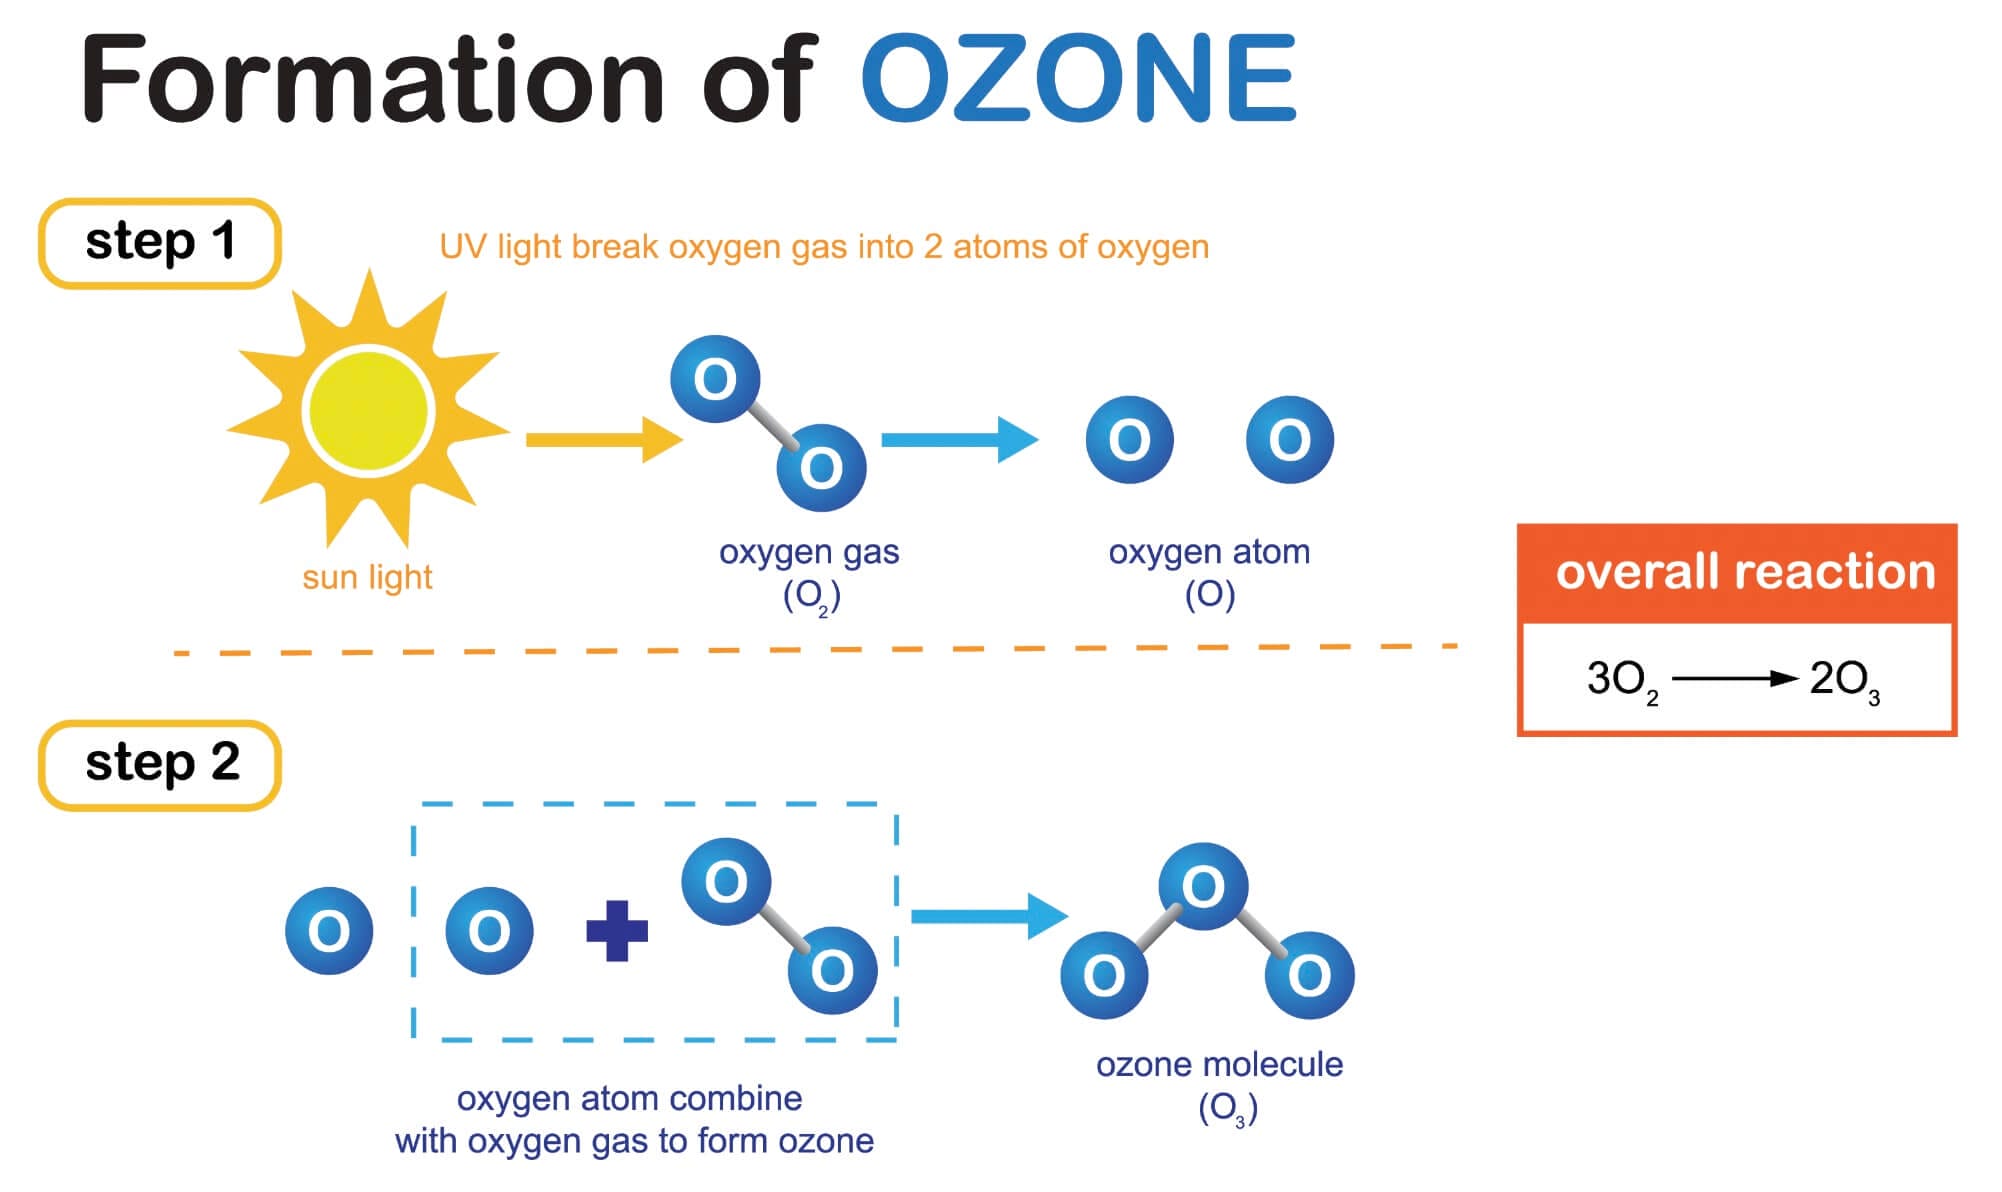 In nature, ozone is created when UV light interacts with oxygen molecules.